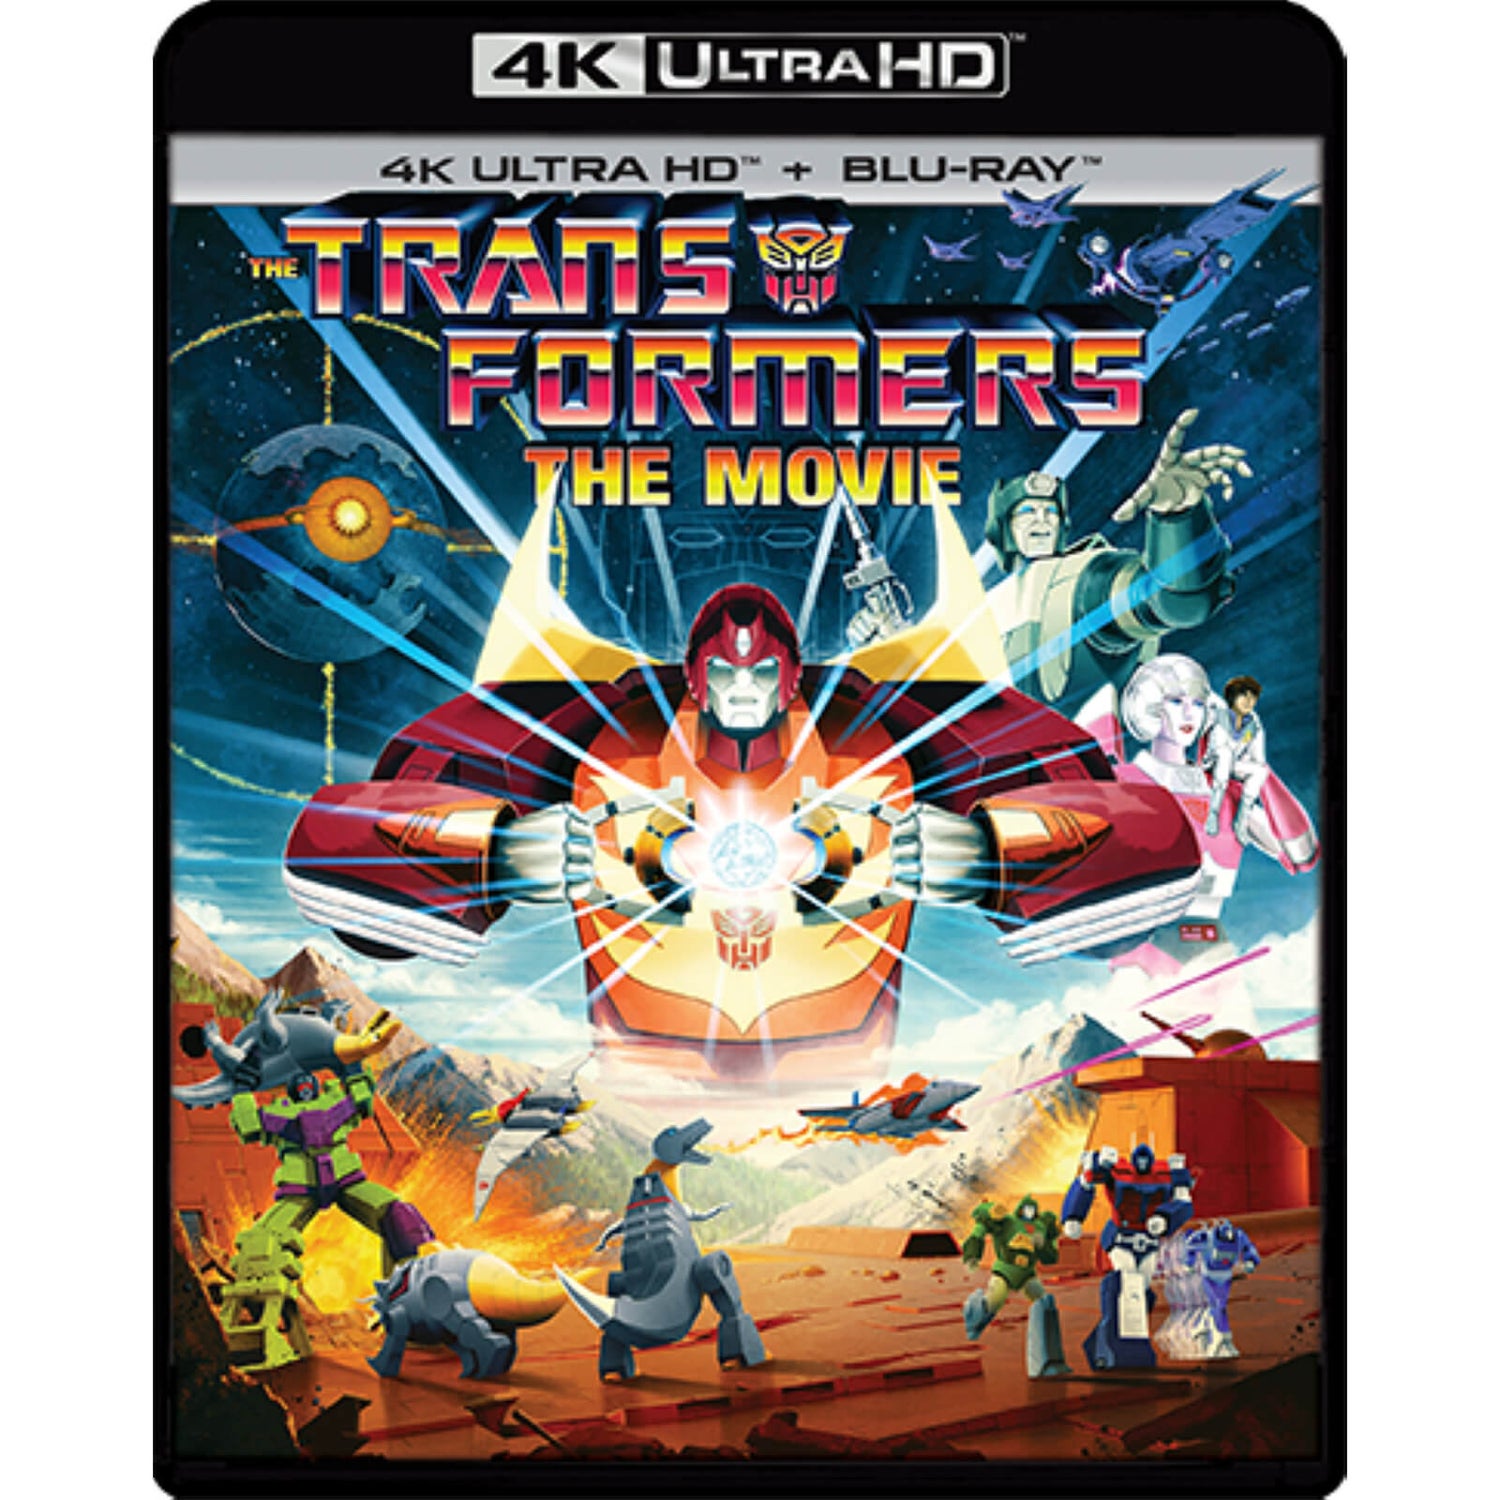 The Transformers: The Movie -35th Anniversary Limited Edition 4K Ultra HD (Includes Blu-ray) (US Import)